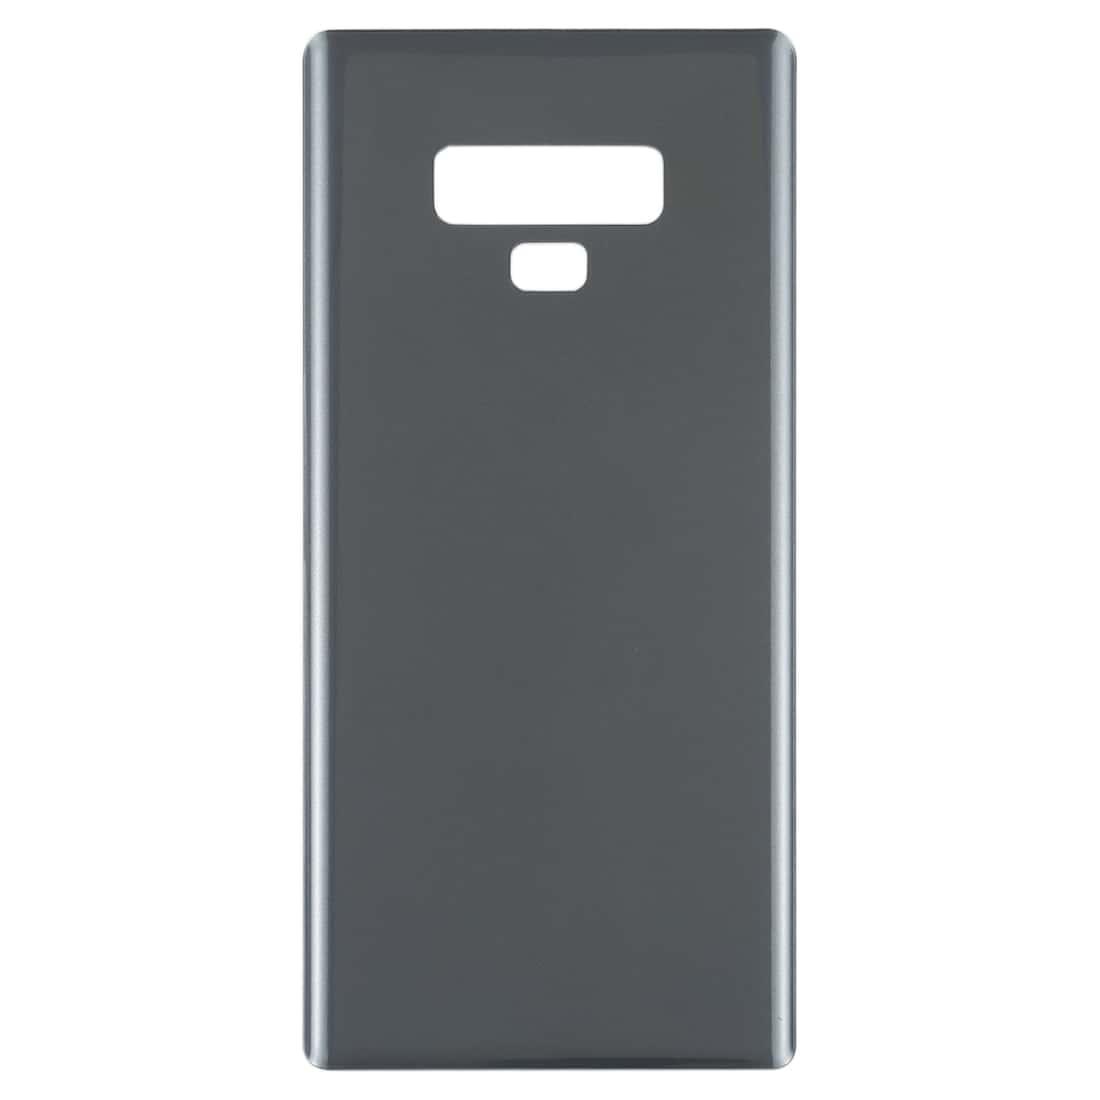 Back Glass Panel for  Samsung Galaxy Note 9 Grey